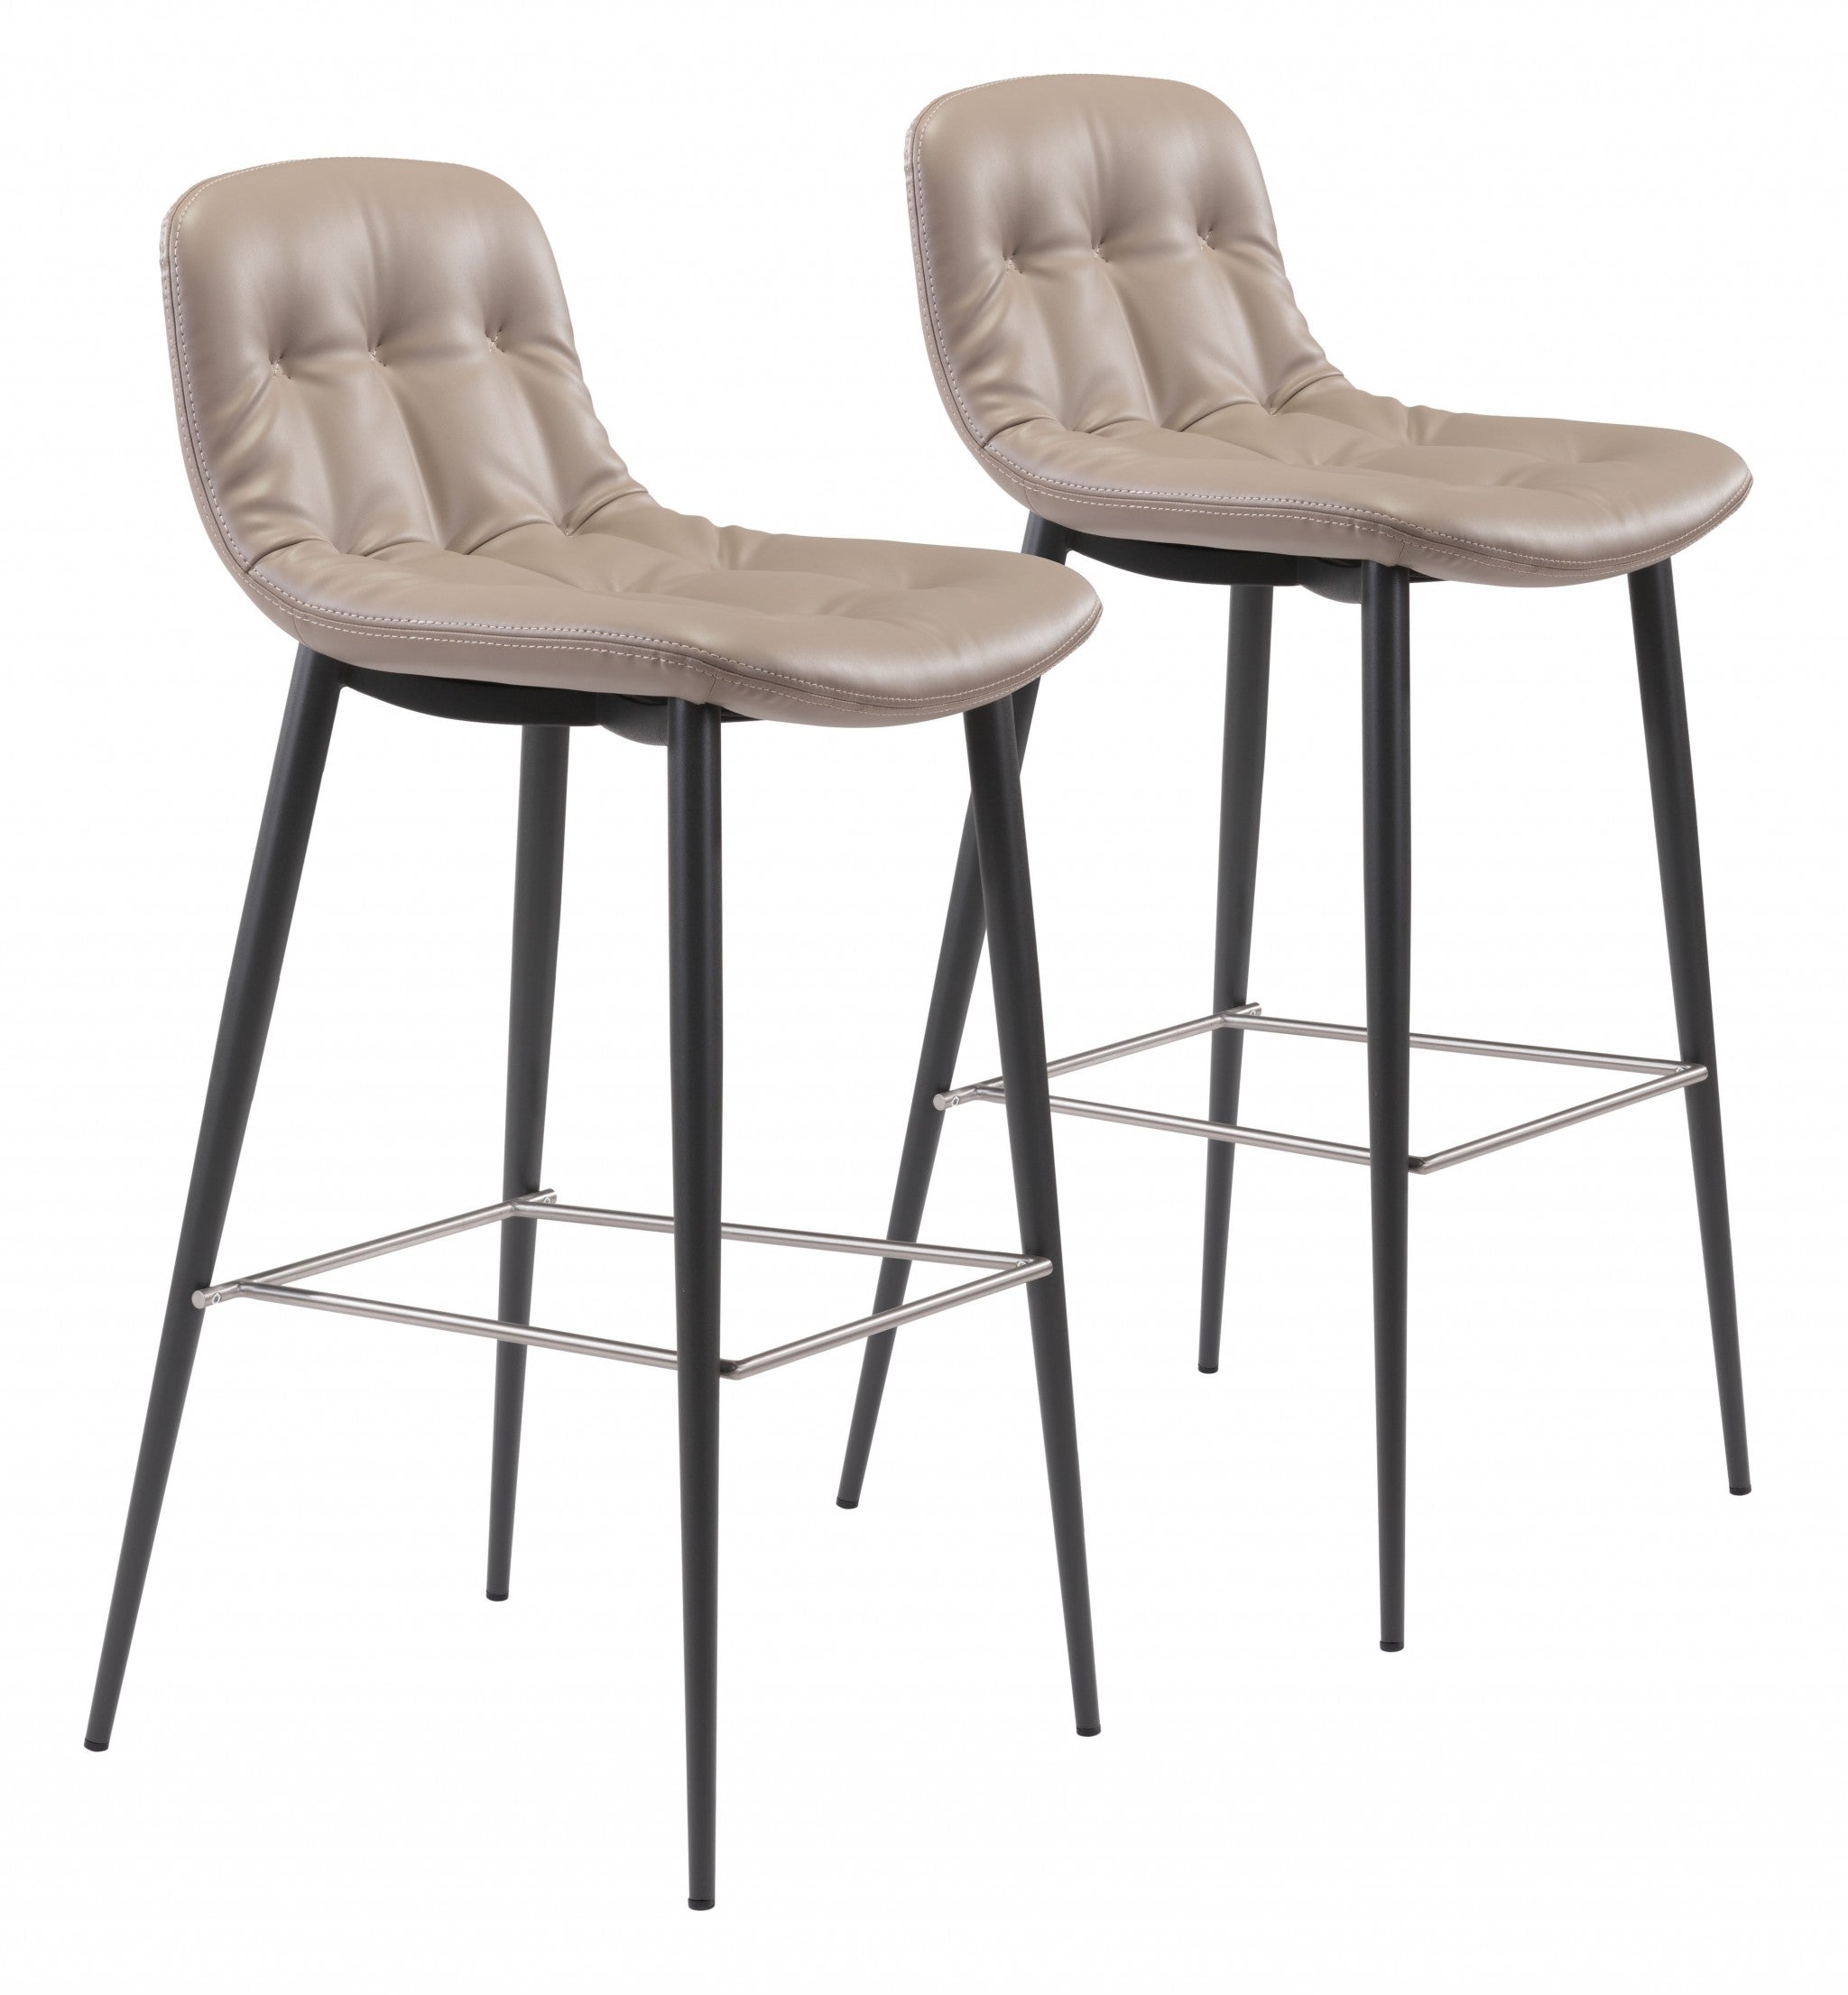 Set of Two 30" Taupe And Black Steel Low Back Bar Height Bar Chairs